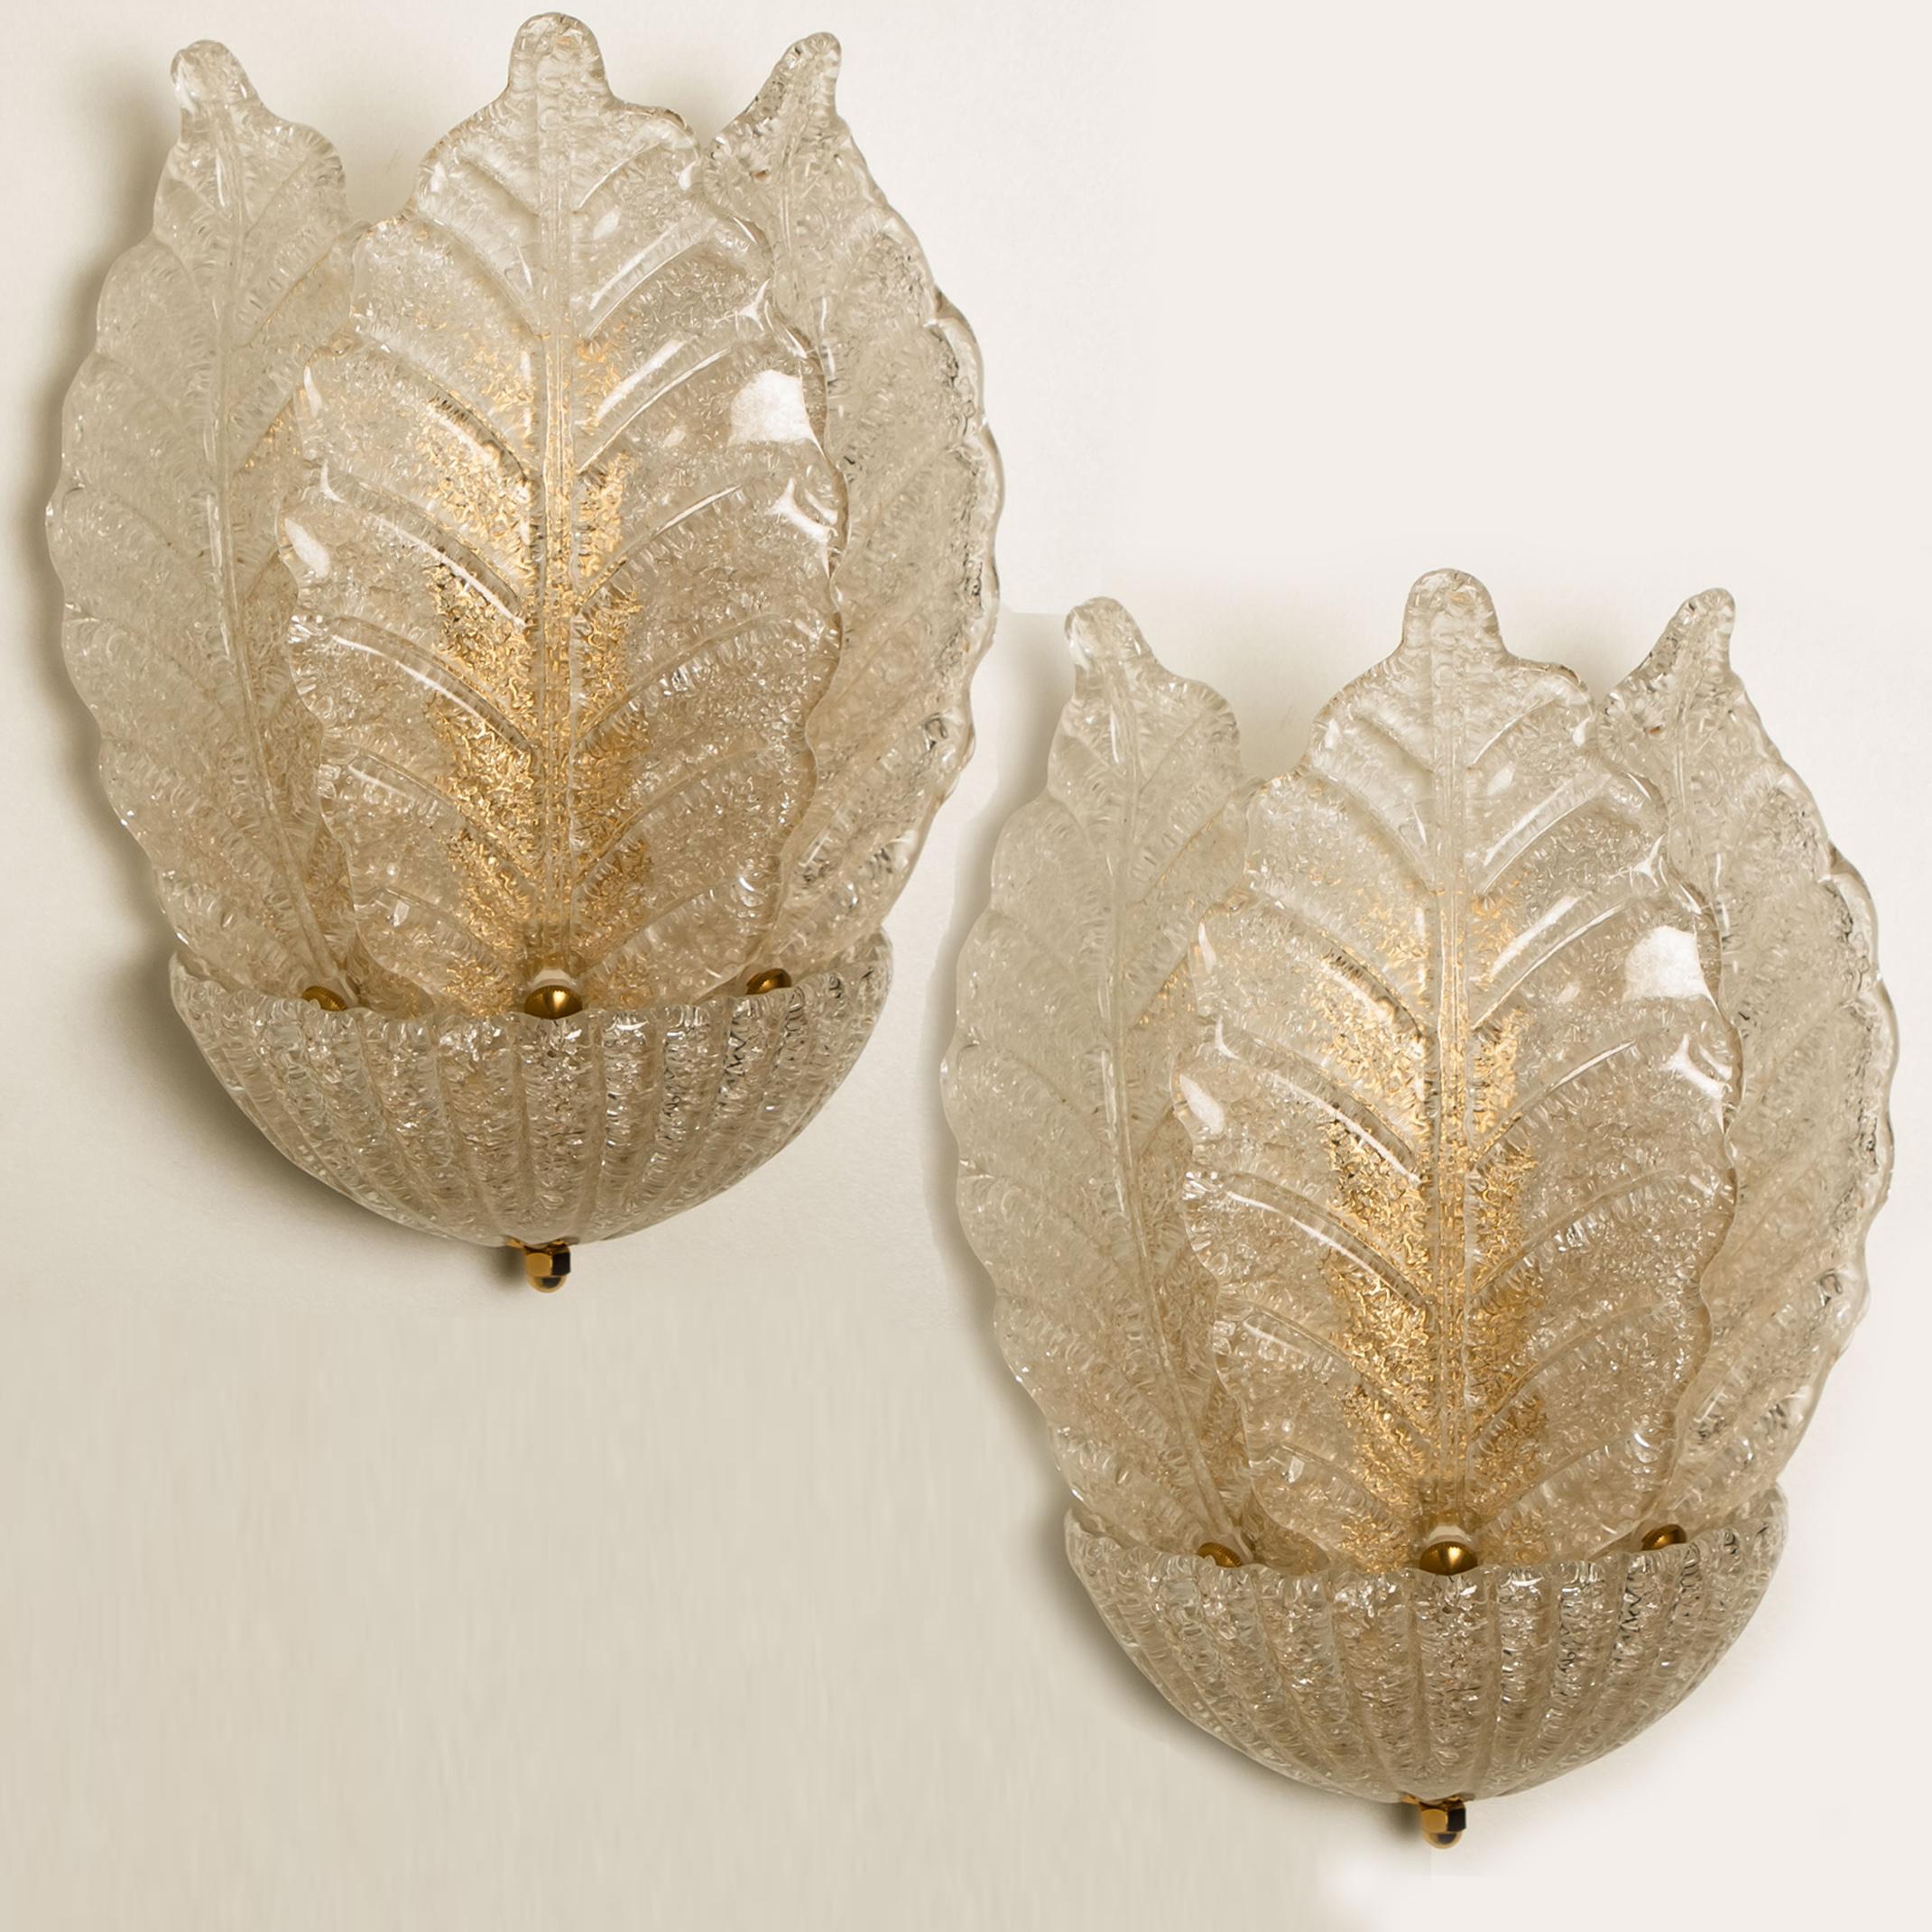 A pair of elegant and exquisite hand blown Murano glass Barovier & Toso wall sconces. Each light fixture consists three blown Murano glass leaves surrounded by a blown cup. Mounted on a gold-plated brass frame. The leaves refract light